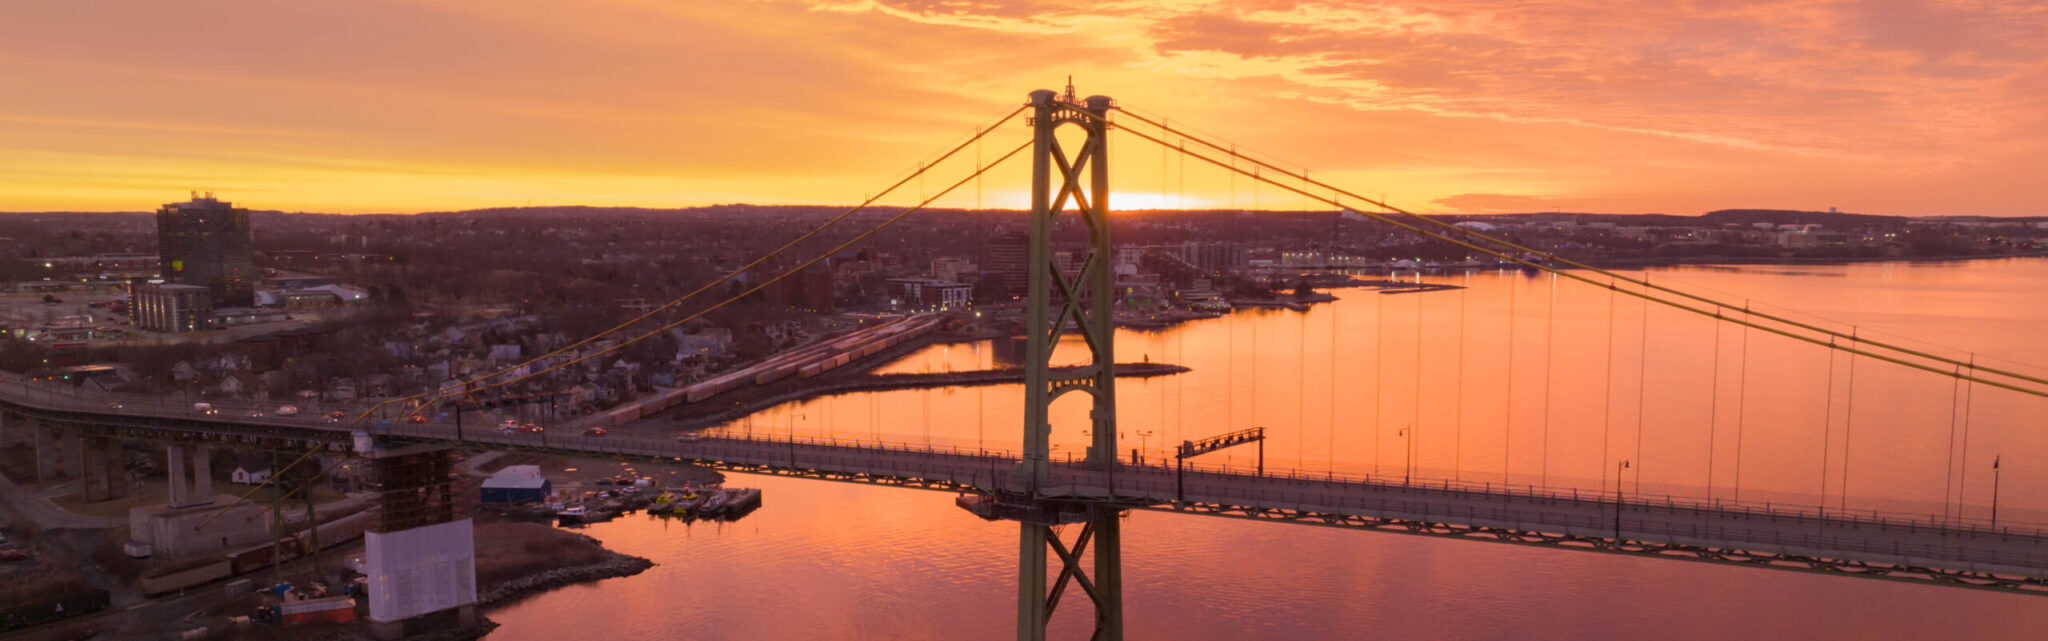 The Macdonald Bridge and Halifax Harbour are seen amid a red-orange sky at sunset.